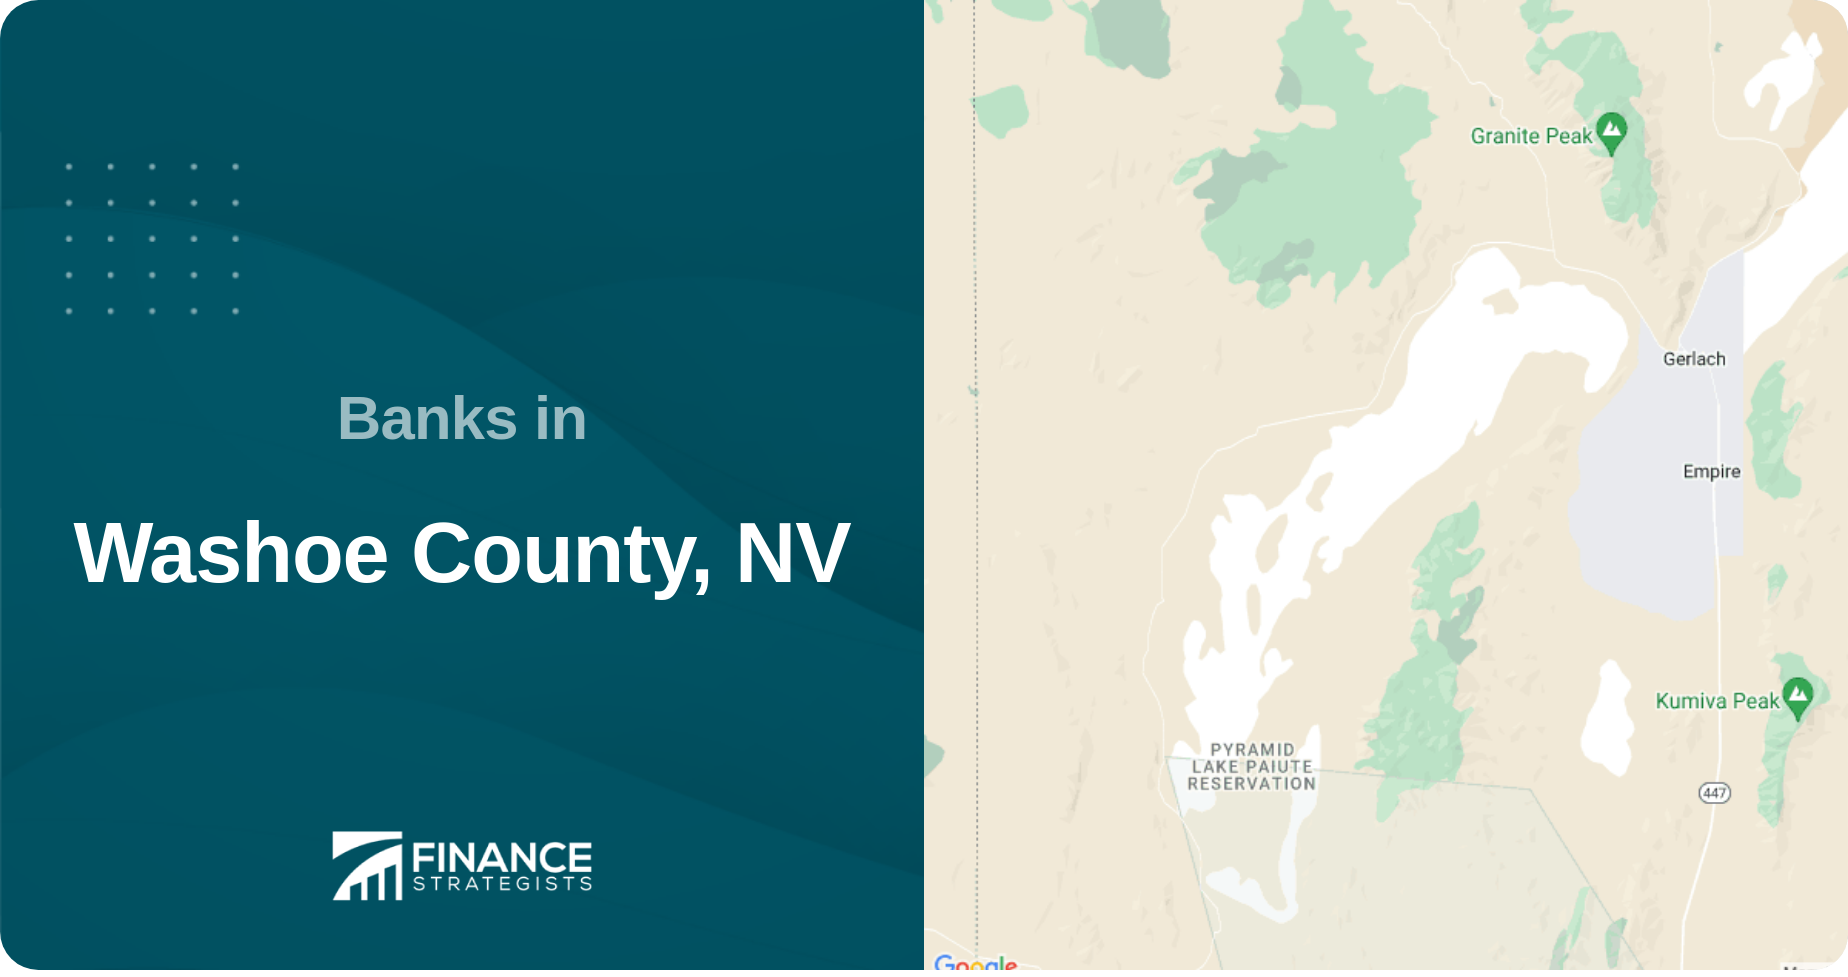 Banks in Washoe County, NV